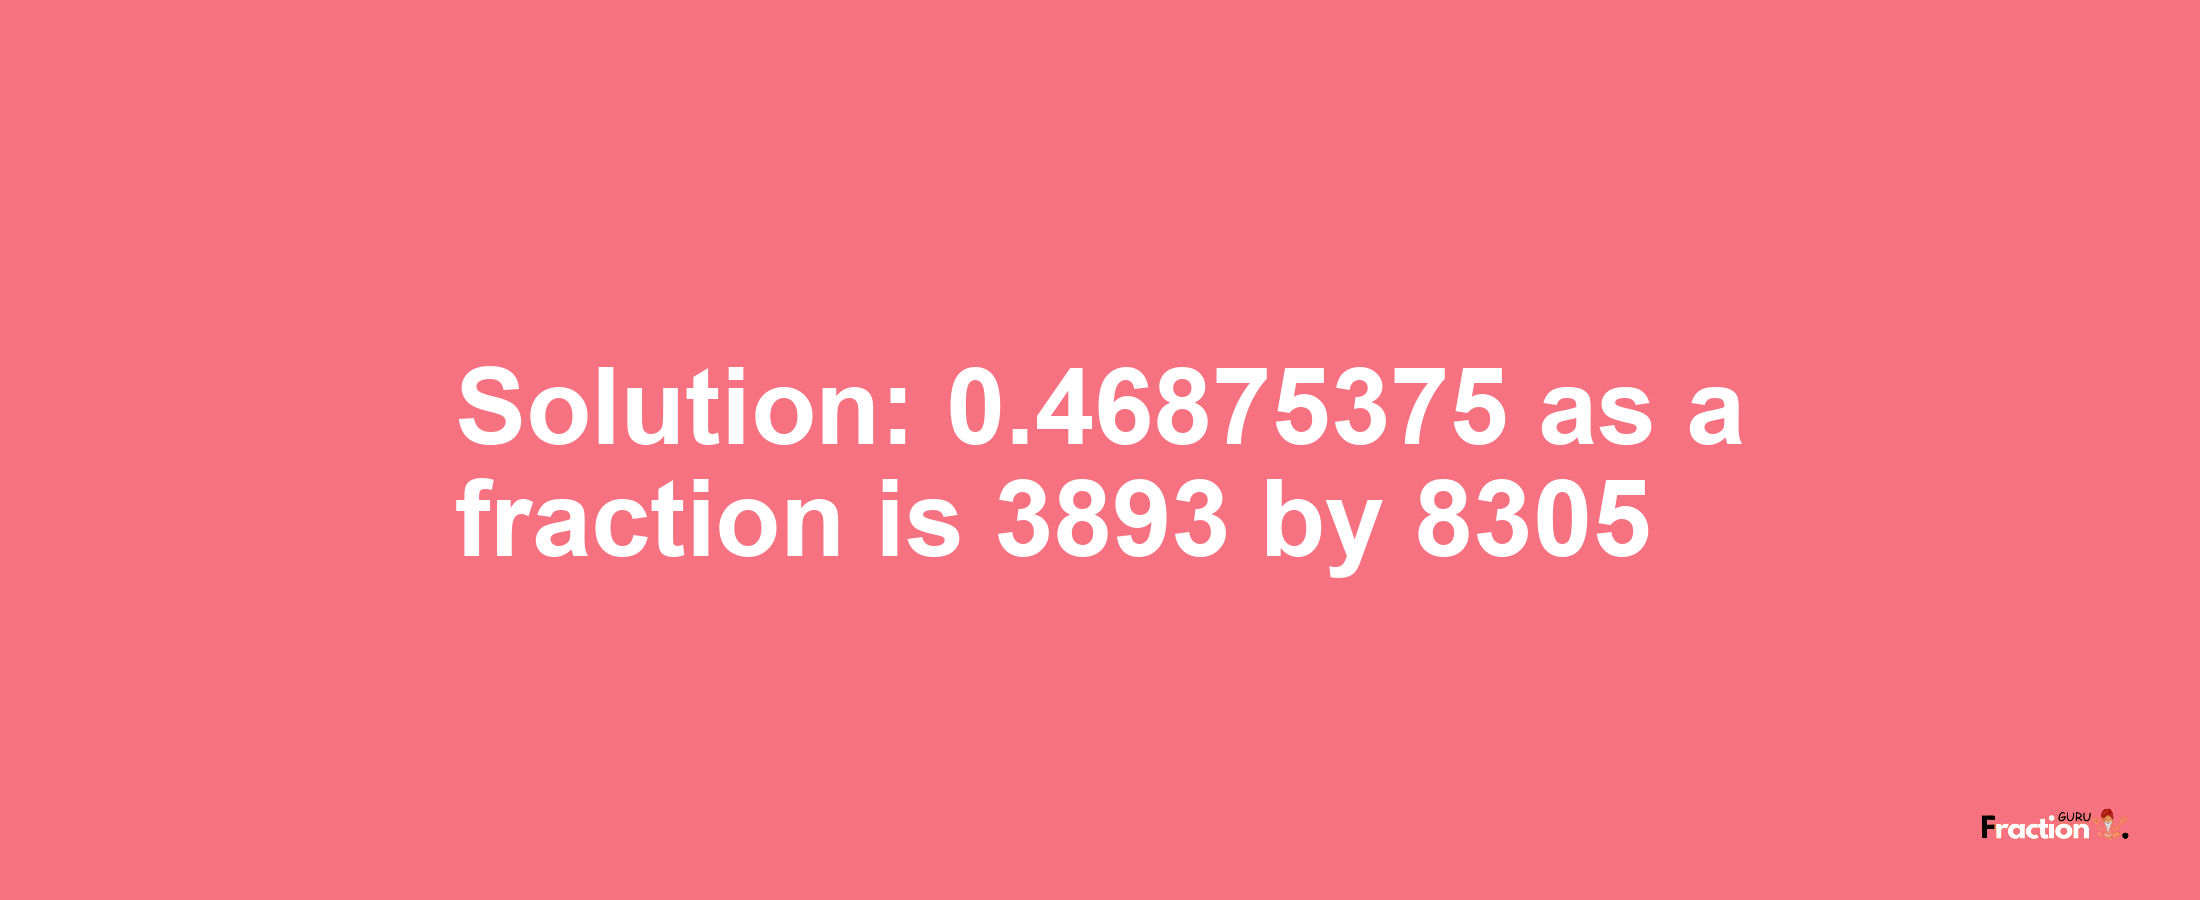 Solution:0.46875375 as a fraction is 3893/8305